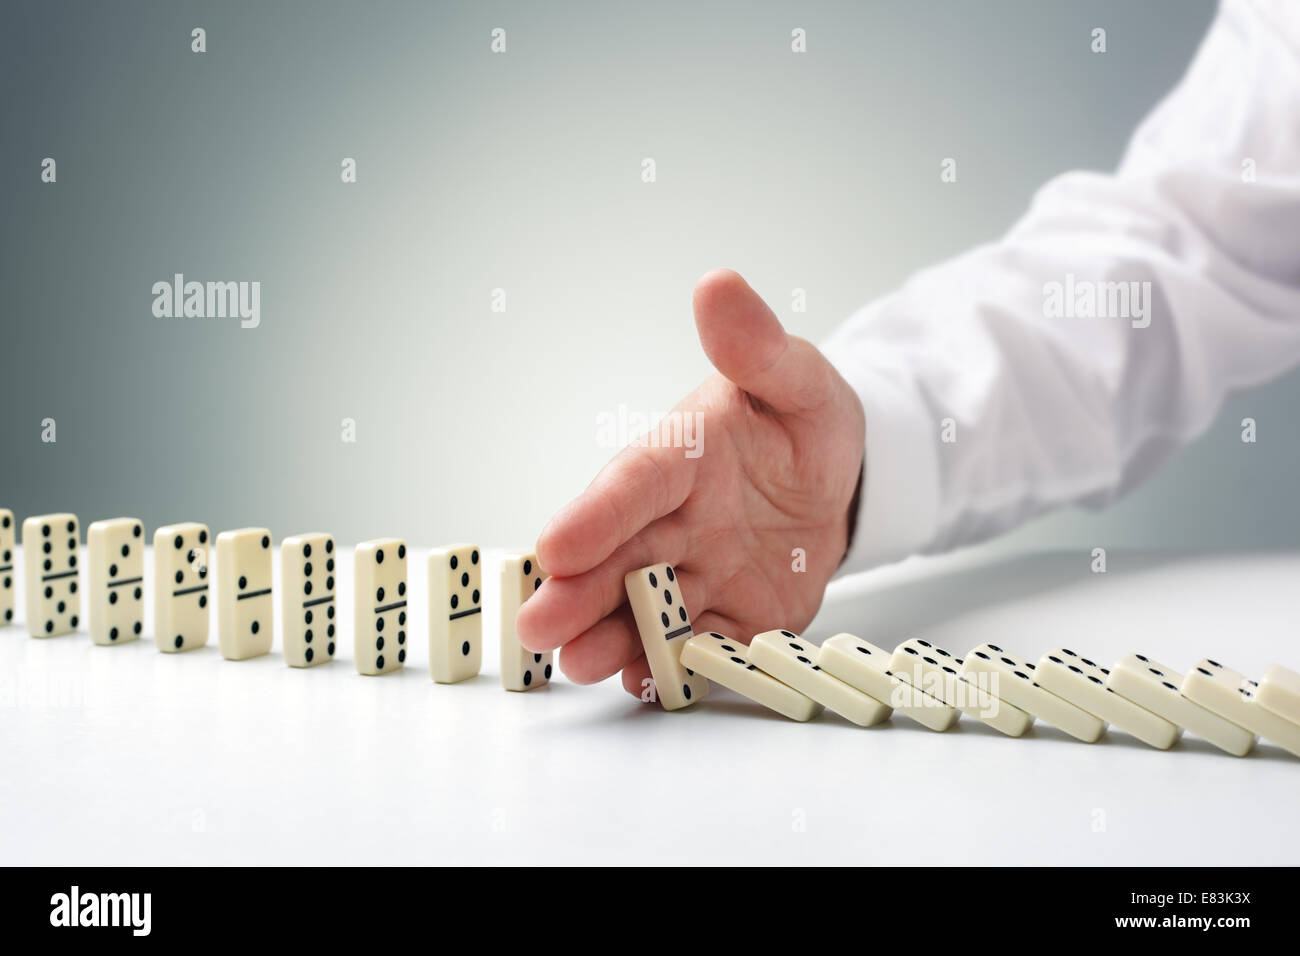 Stopping the domino effect Stock Photo